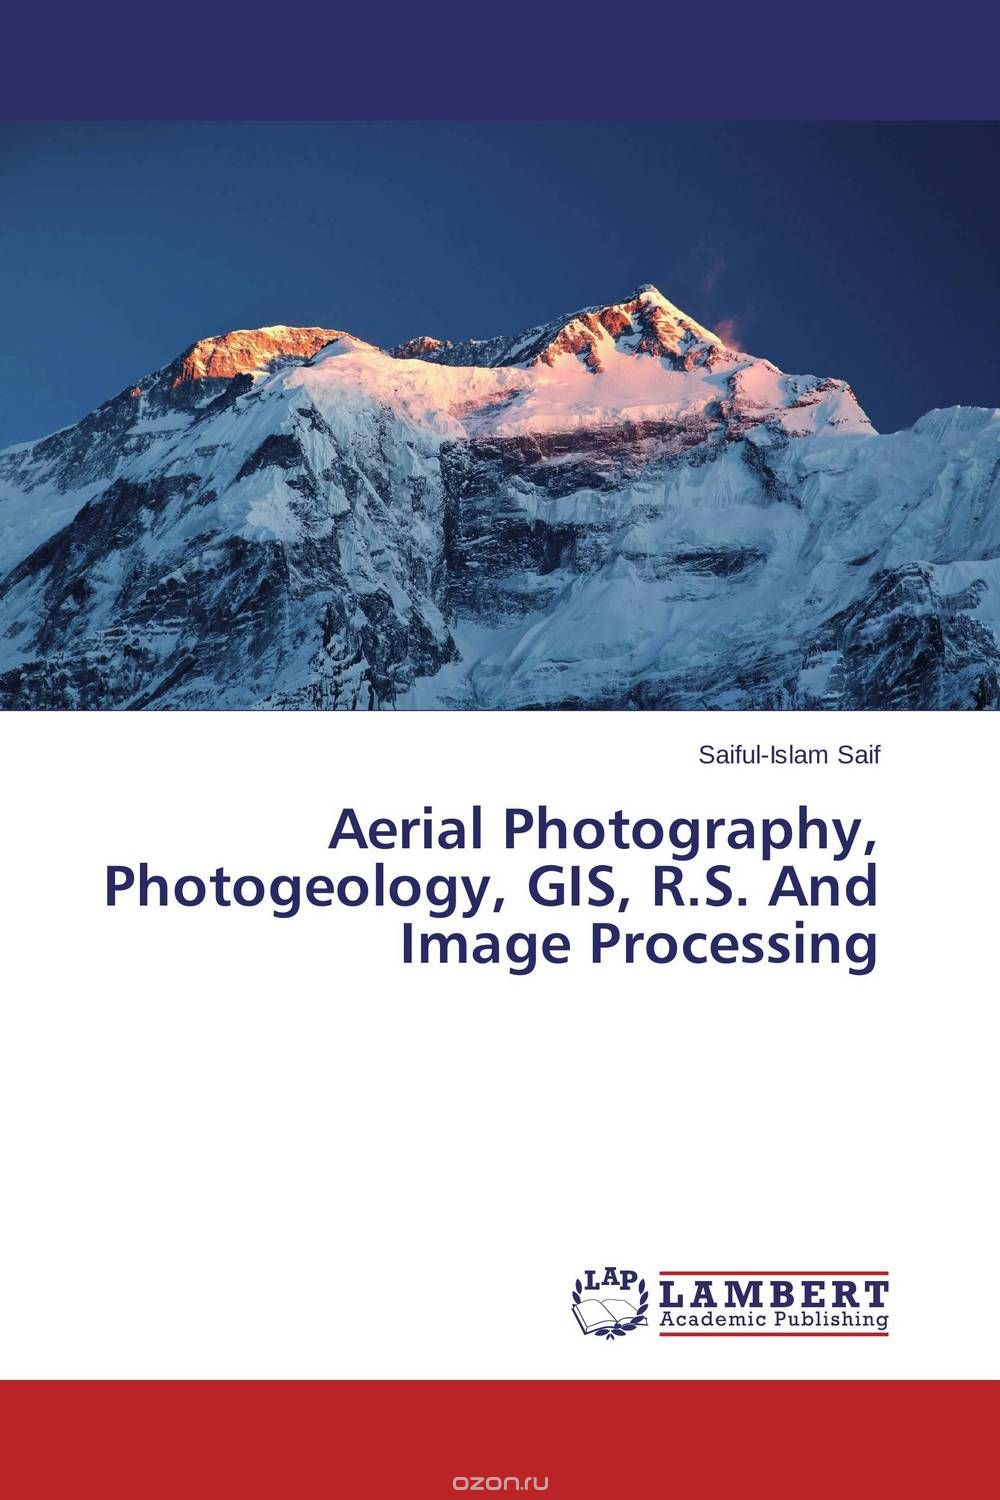 Aerial Photography, Photogeology, GIS, R.S. And Image Processing